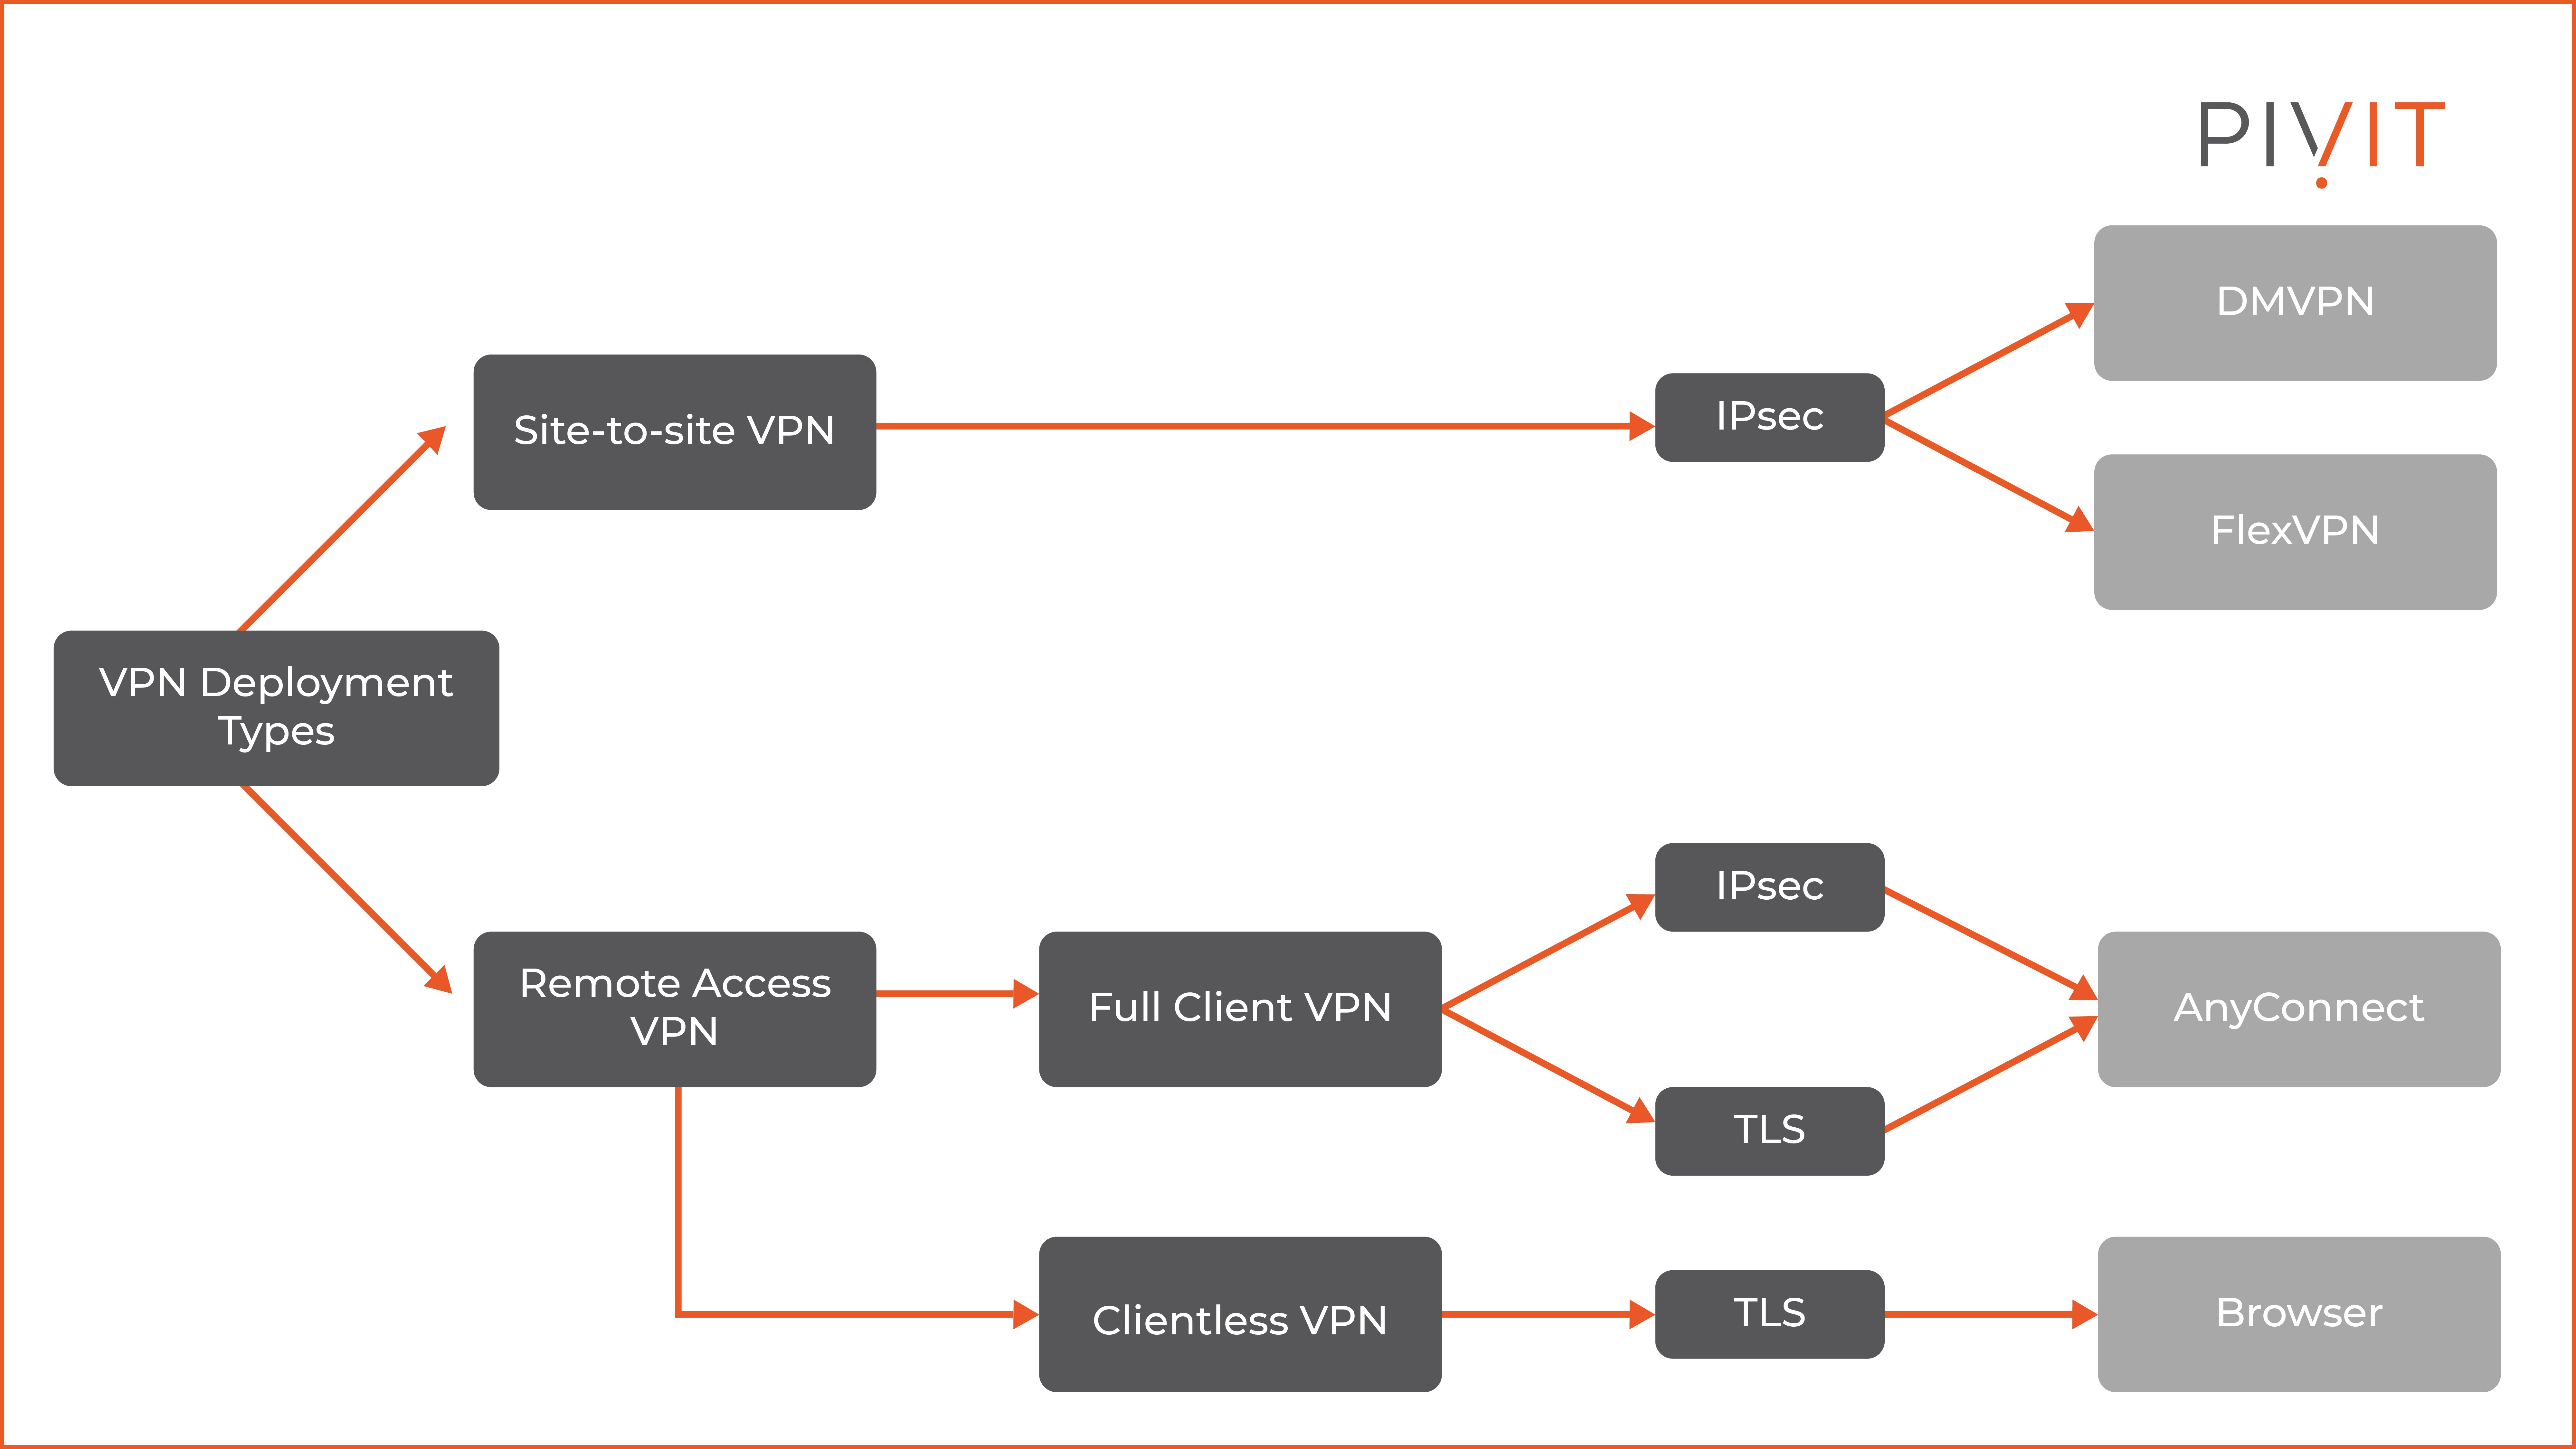 Overview of VPN deployment types, protocols used and access options supported